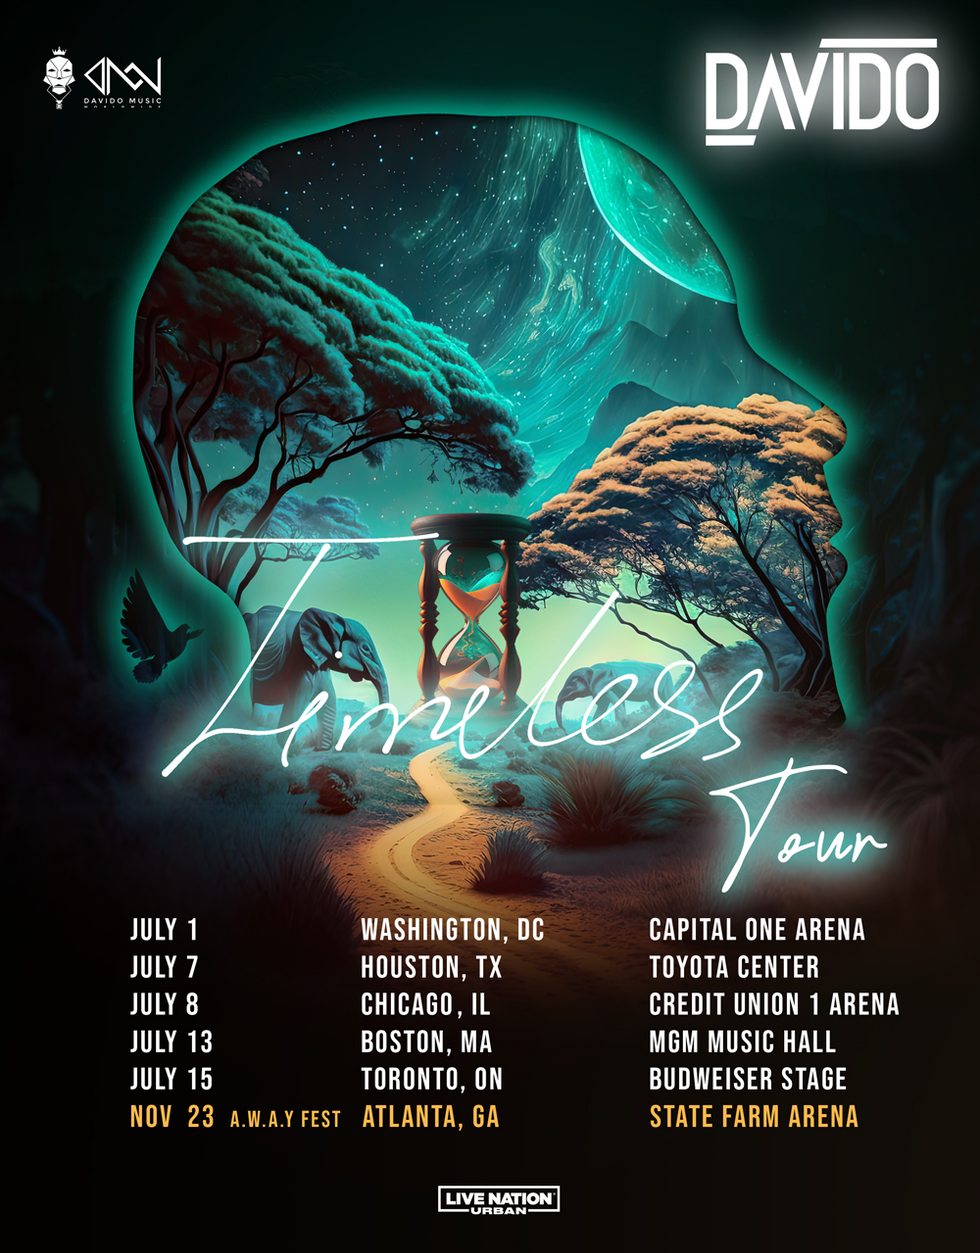 Tour poster for Davidou2019s upcoming Timeless North American tour